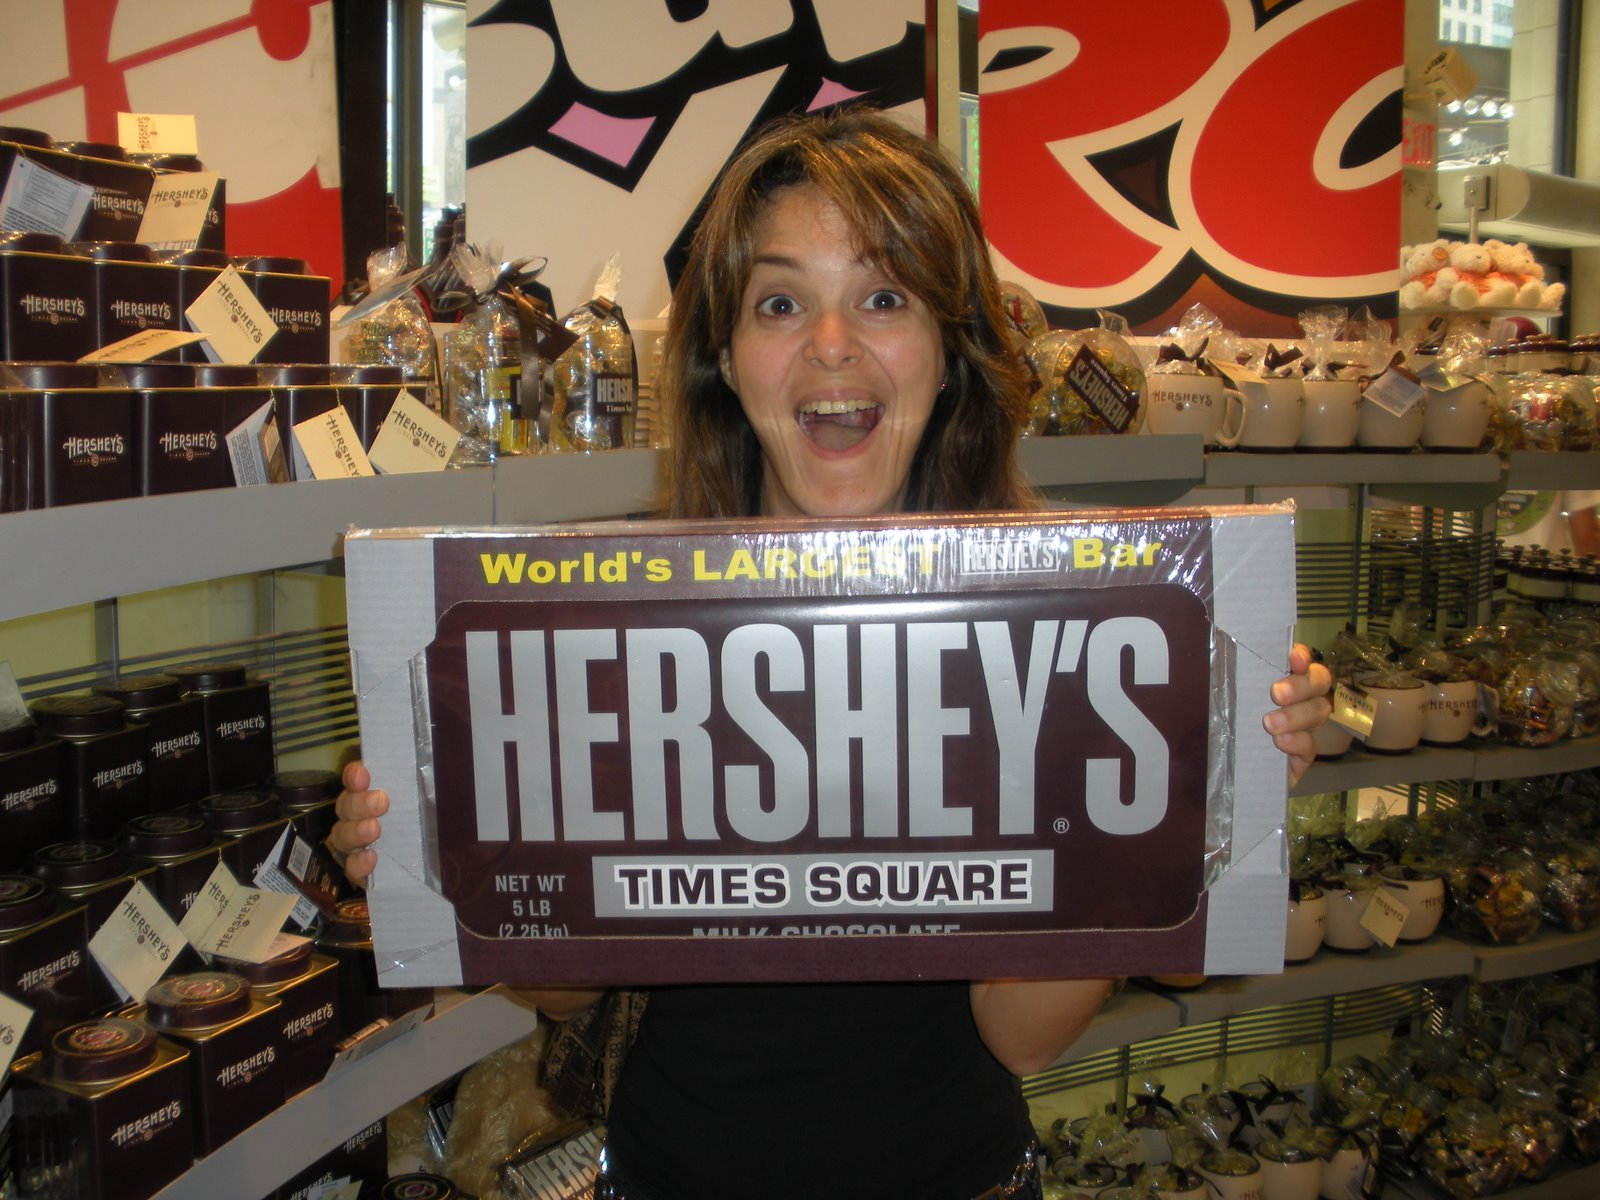 The Largest Hershey Bar on the Planet